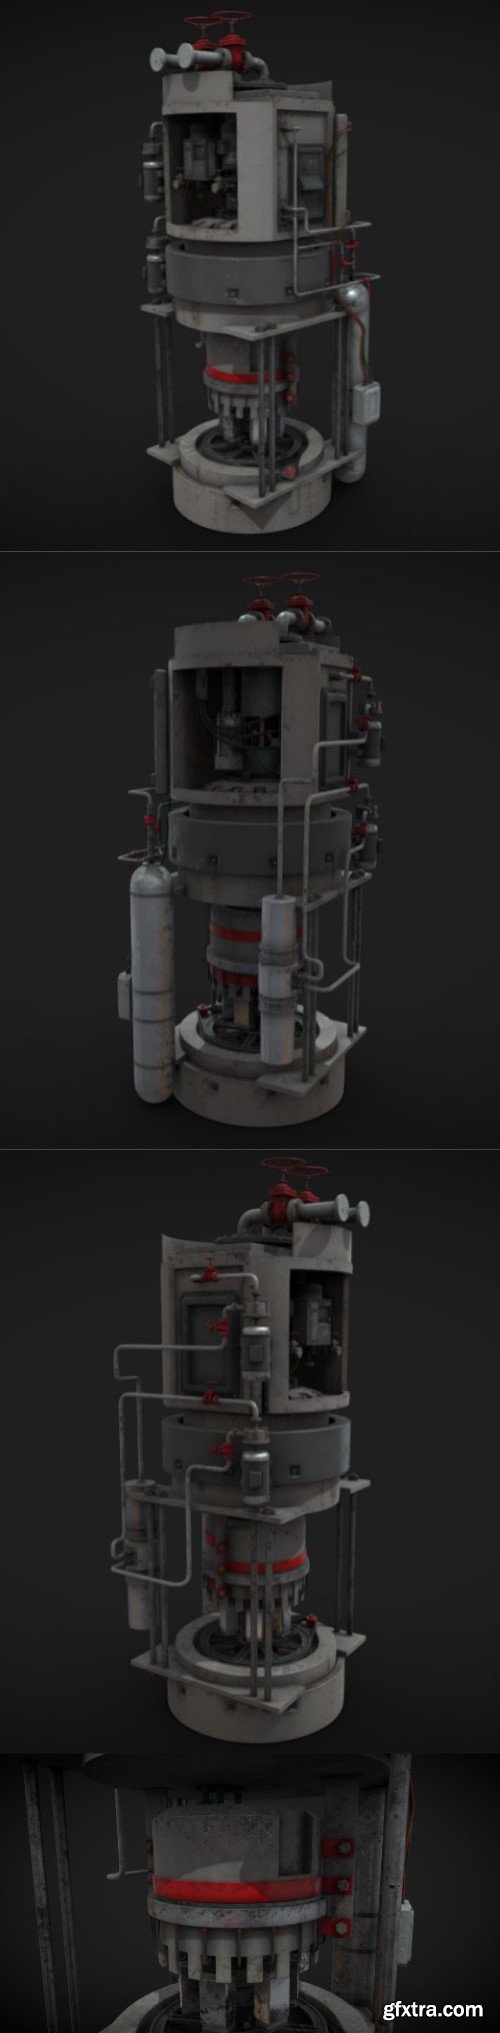 Machinery device 3D model